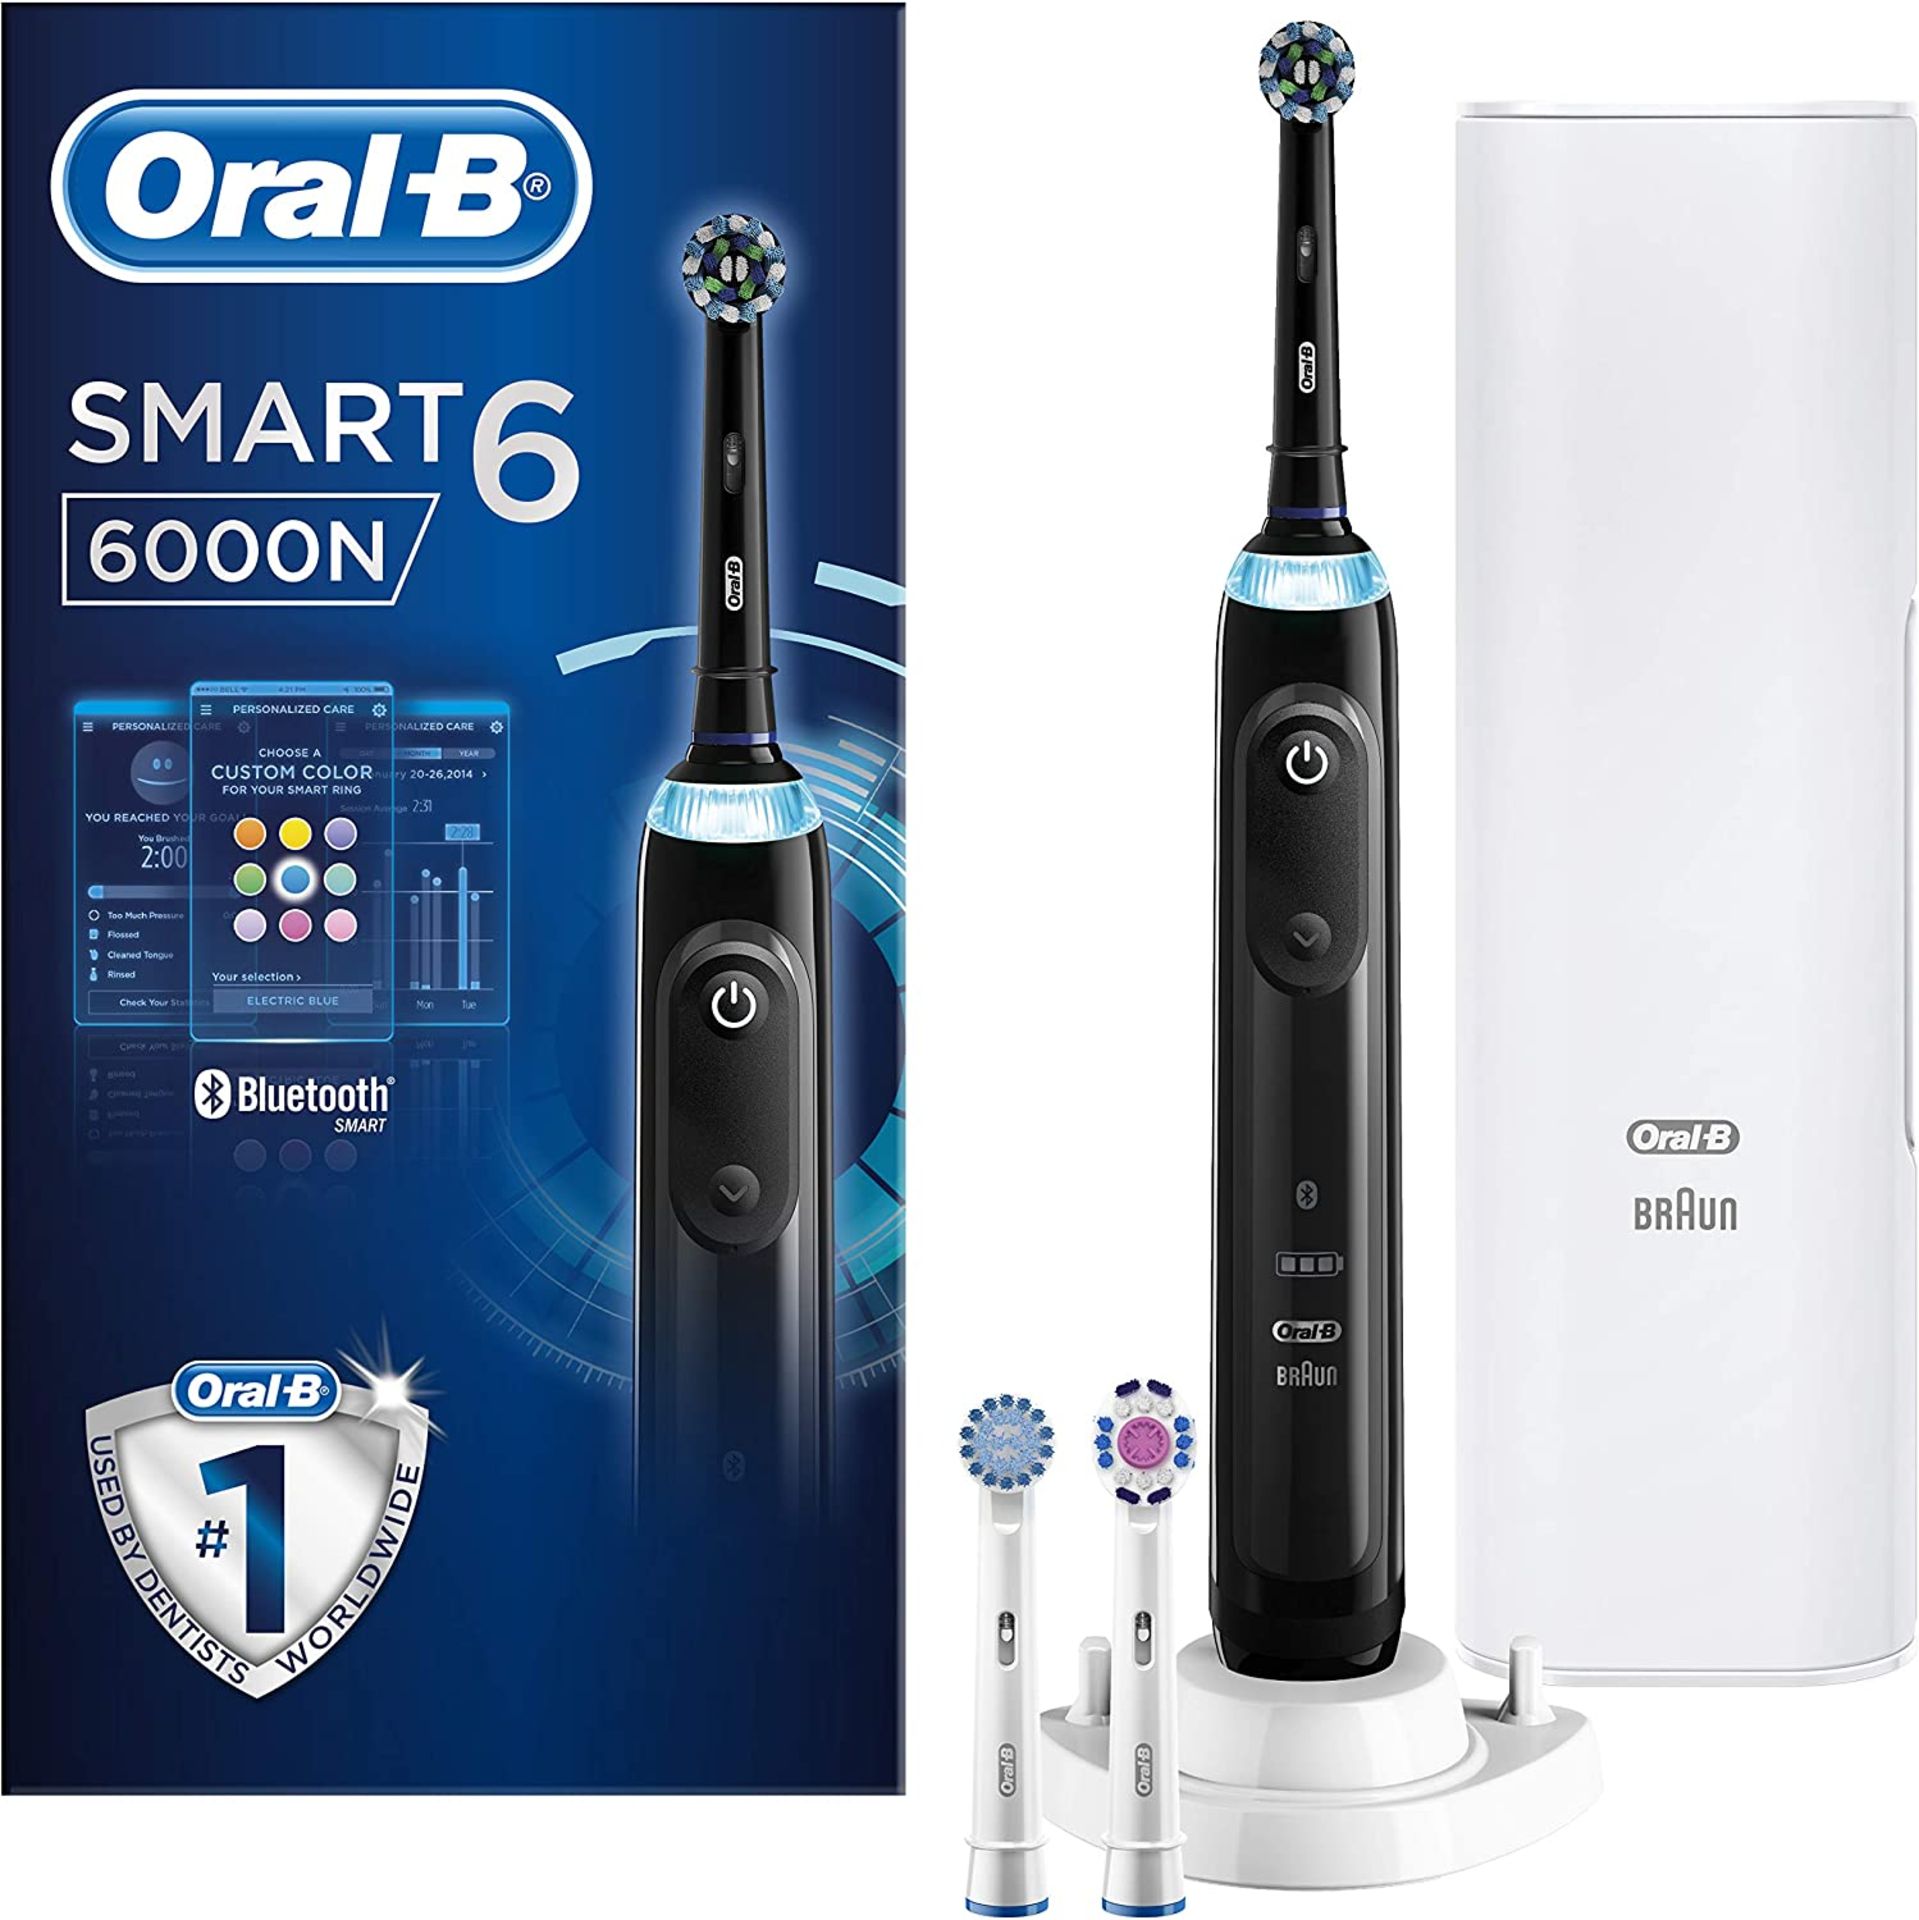 RRP £90 Oral-B Smart 6 6000N CrossAction Electric Toothbrush, 1 Black App Connected Handle, 5 Modes,